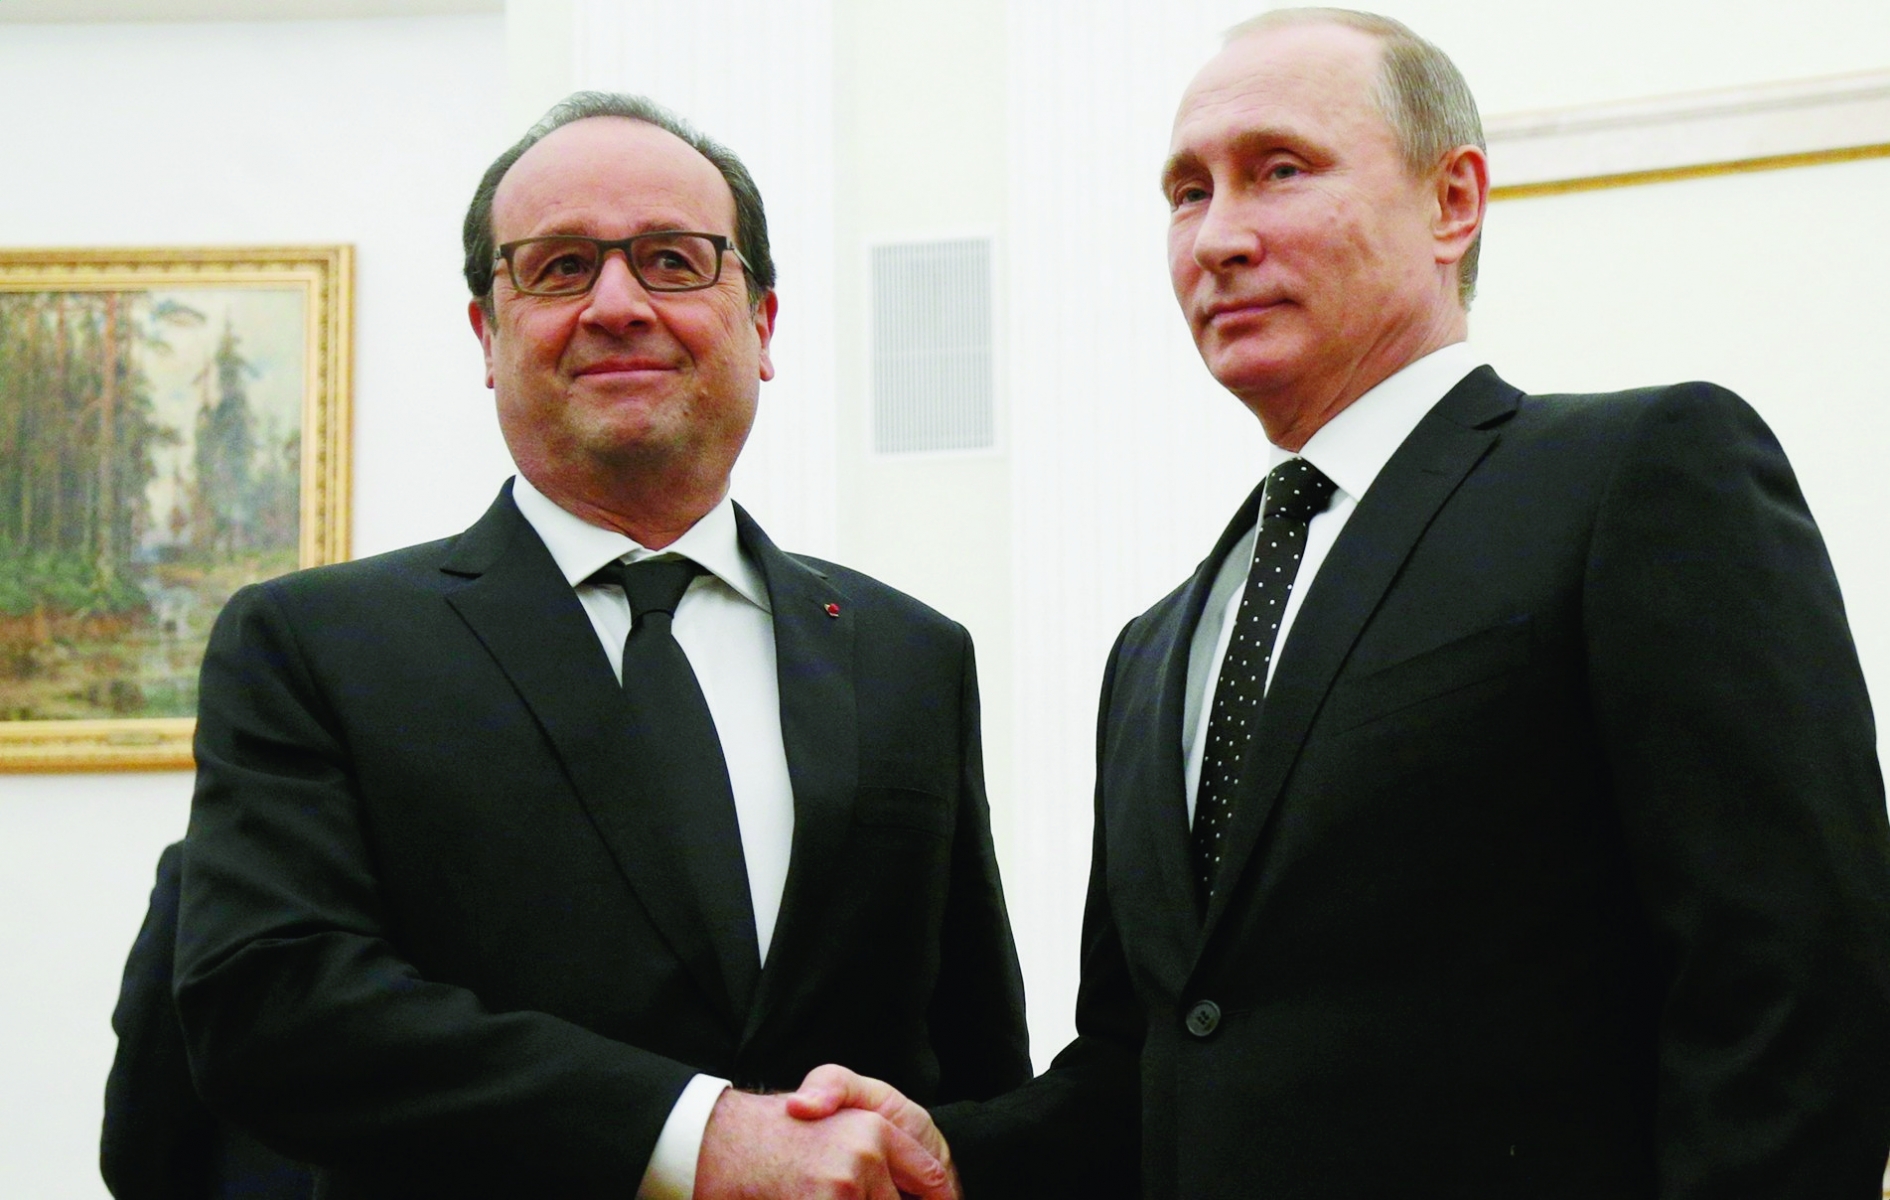 epa05043029 Russian President Vladimir Putin (R) shakes hands with French President Francois Hollande (L), during their meeting in Moscow, Russia, 26 November 2015. Francois Hollande arrived in Moscow to discuss coordination in their common struggle against so called Islamic State terrorist formation in Syria.  EPA/ALEXANDER ZEMLIANICHENKO / POOL RUSSIA FRANCE HOLLANDE DIPLOMACY